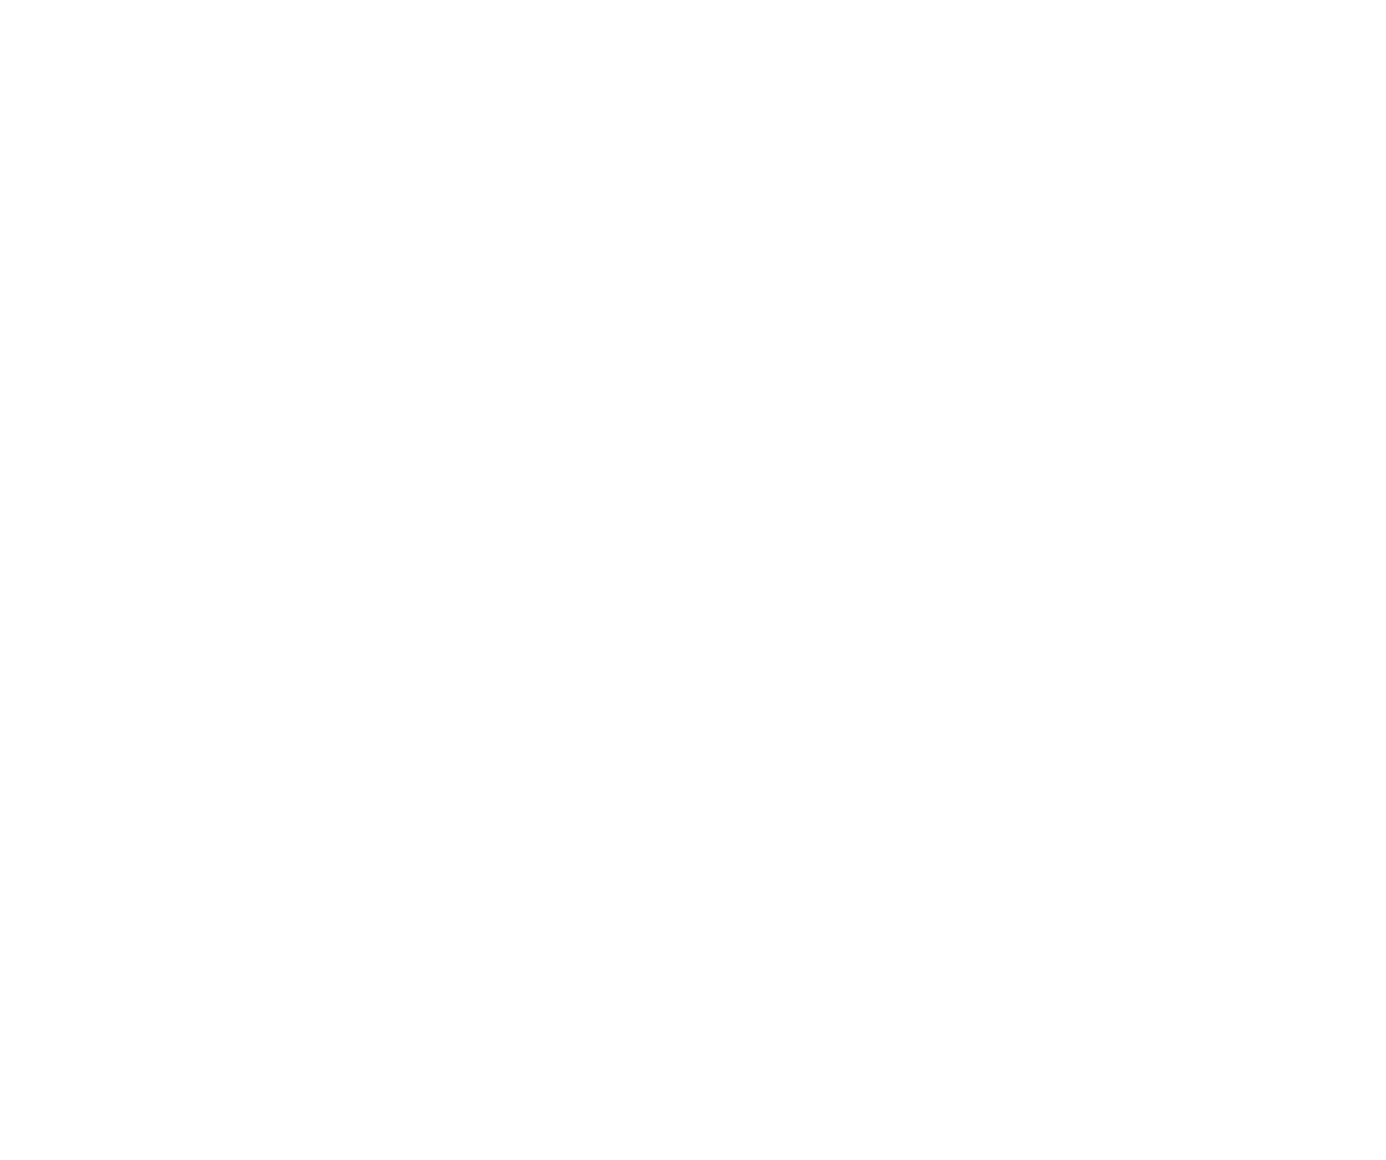 THE-SAFETY-ANYWHERE-white